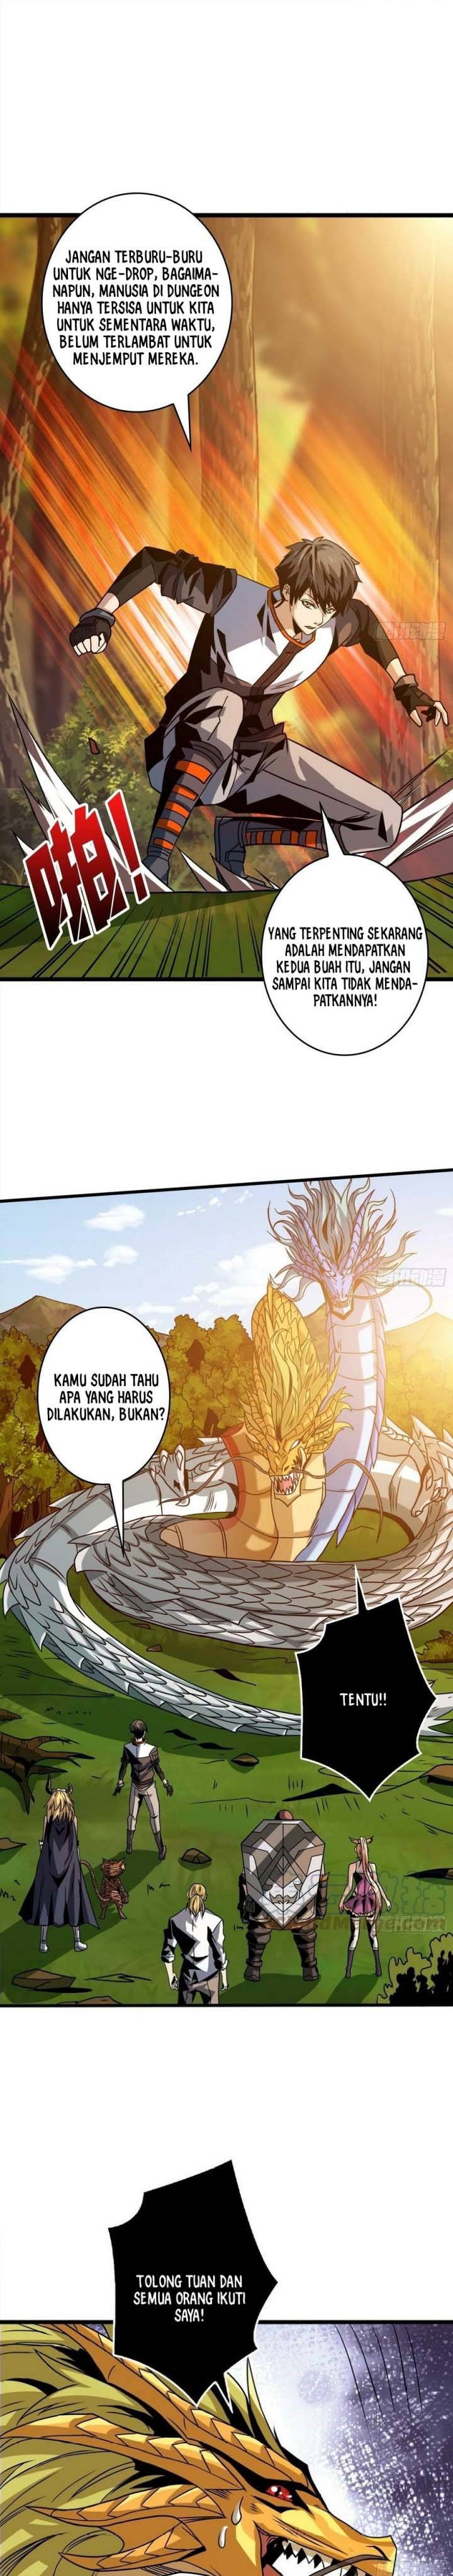 King Account At The Start Chapter 105